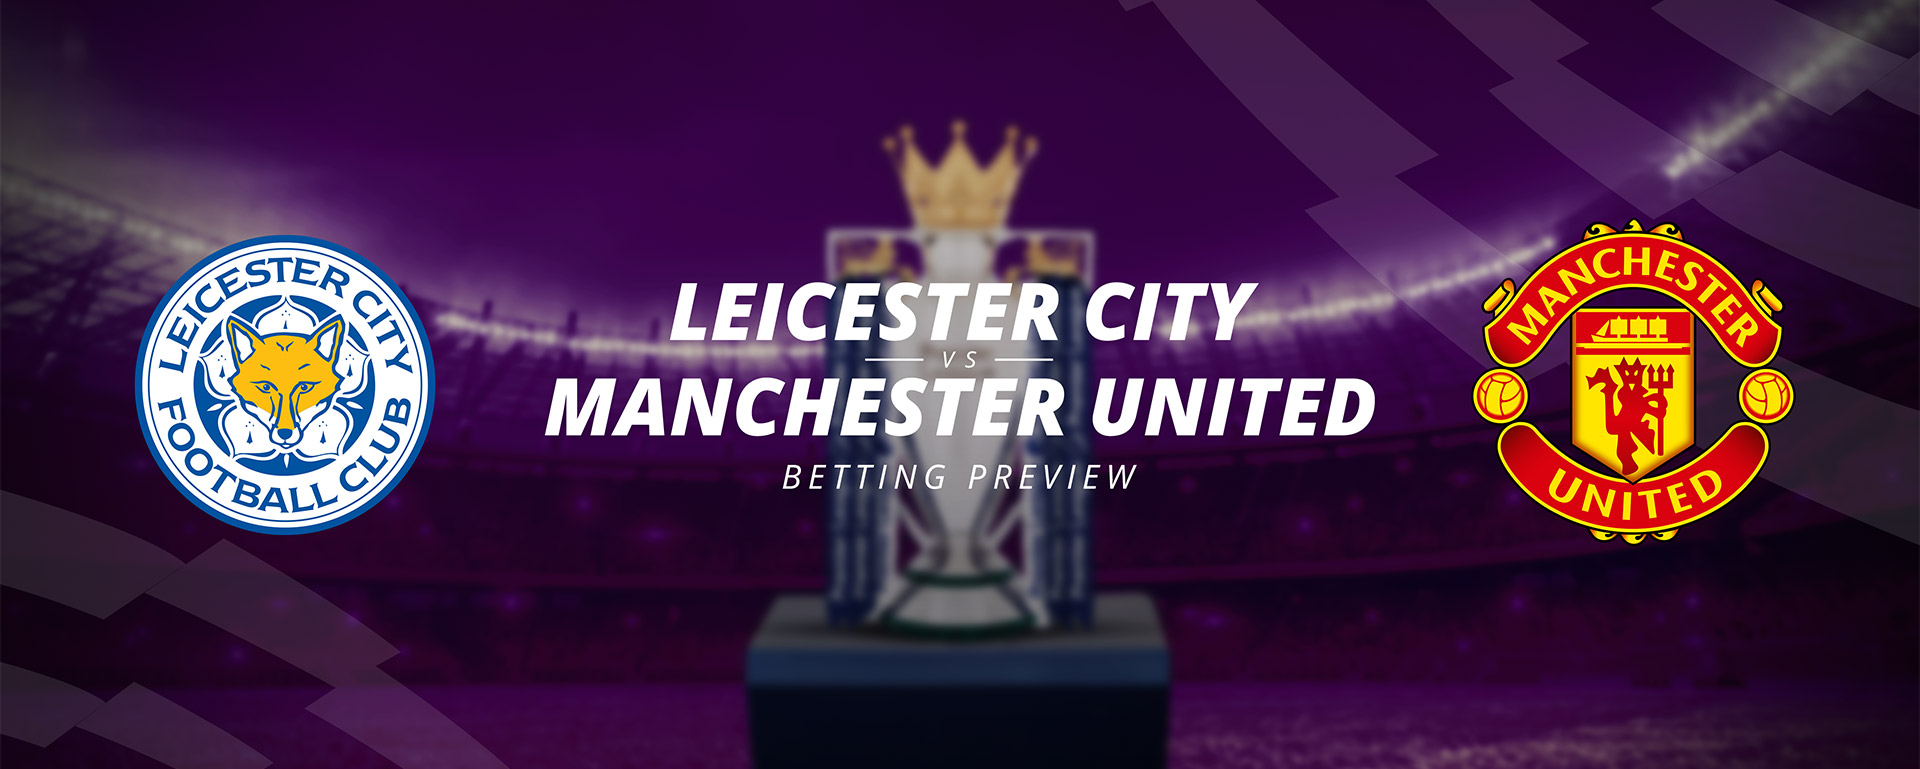 LEICESTER CITY VS MANCHESTER UNITED: MATCH PREVIEW